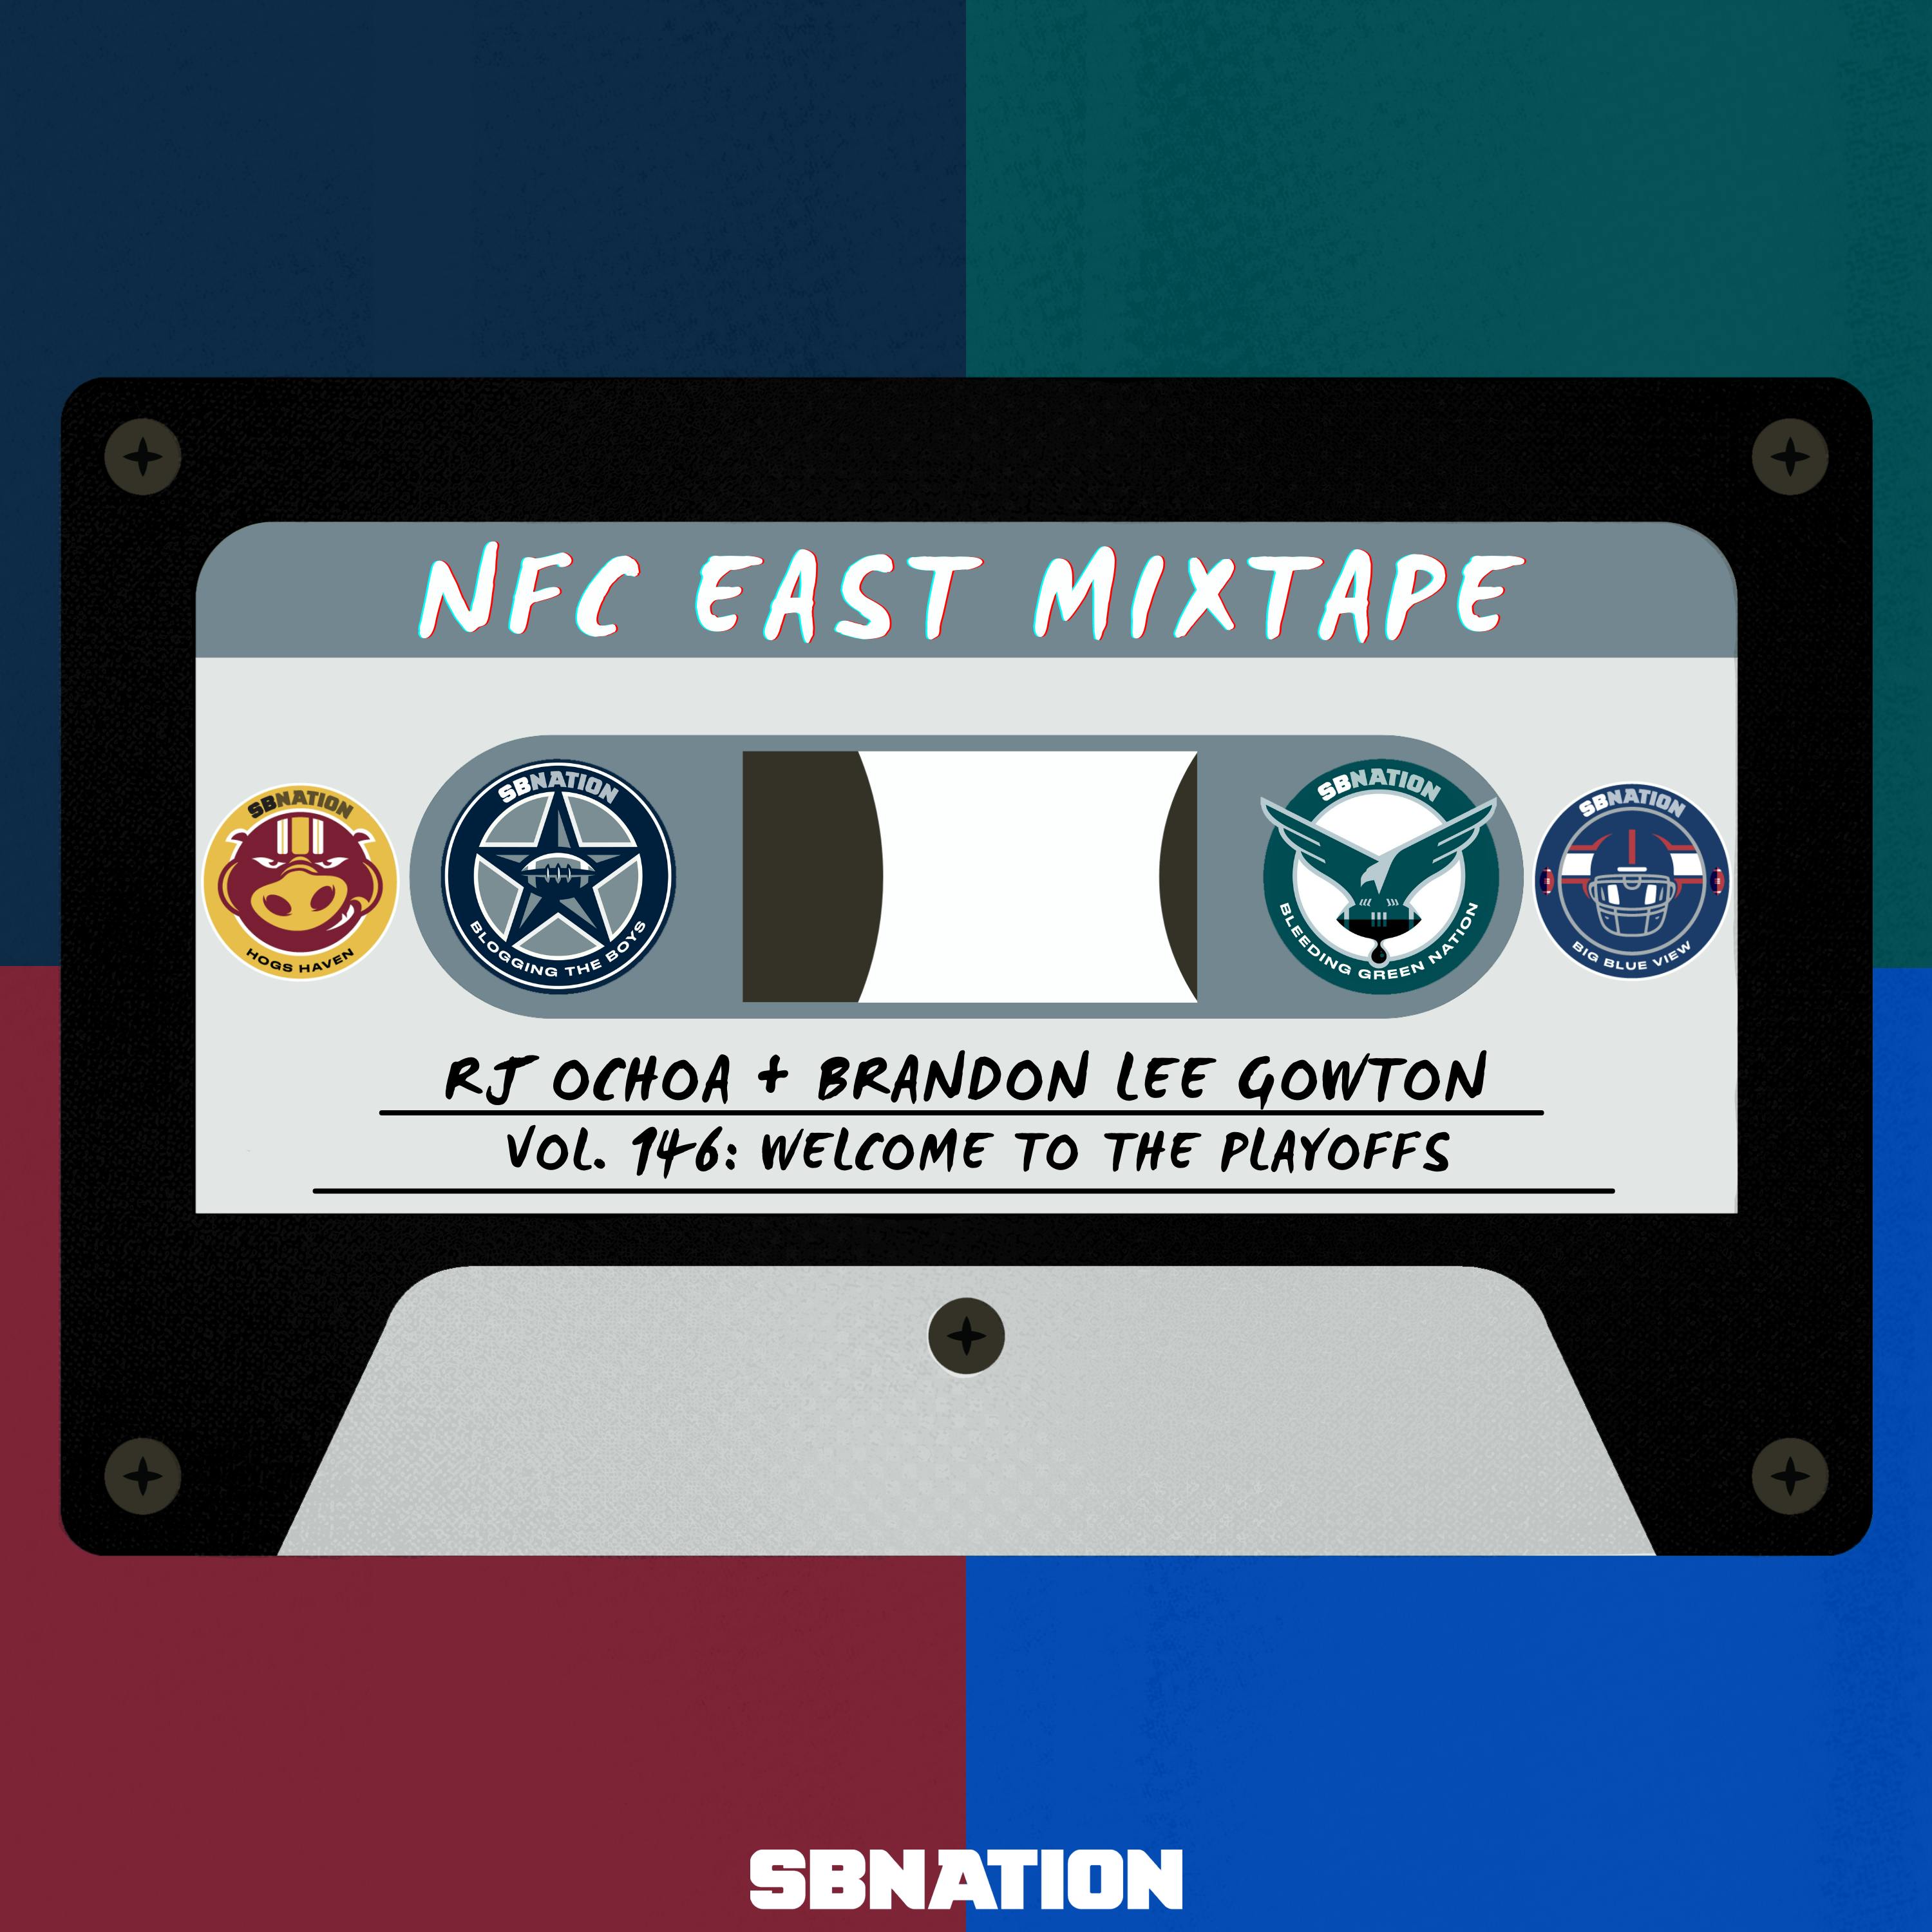 NFC East Mixtape Vol.146: Welcome to the playoffs